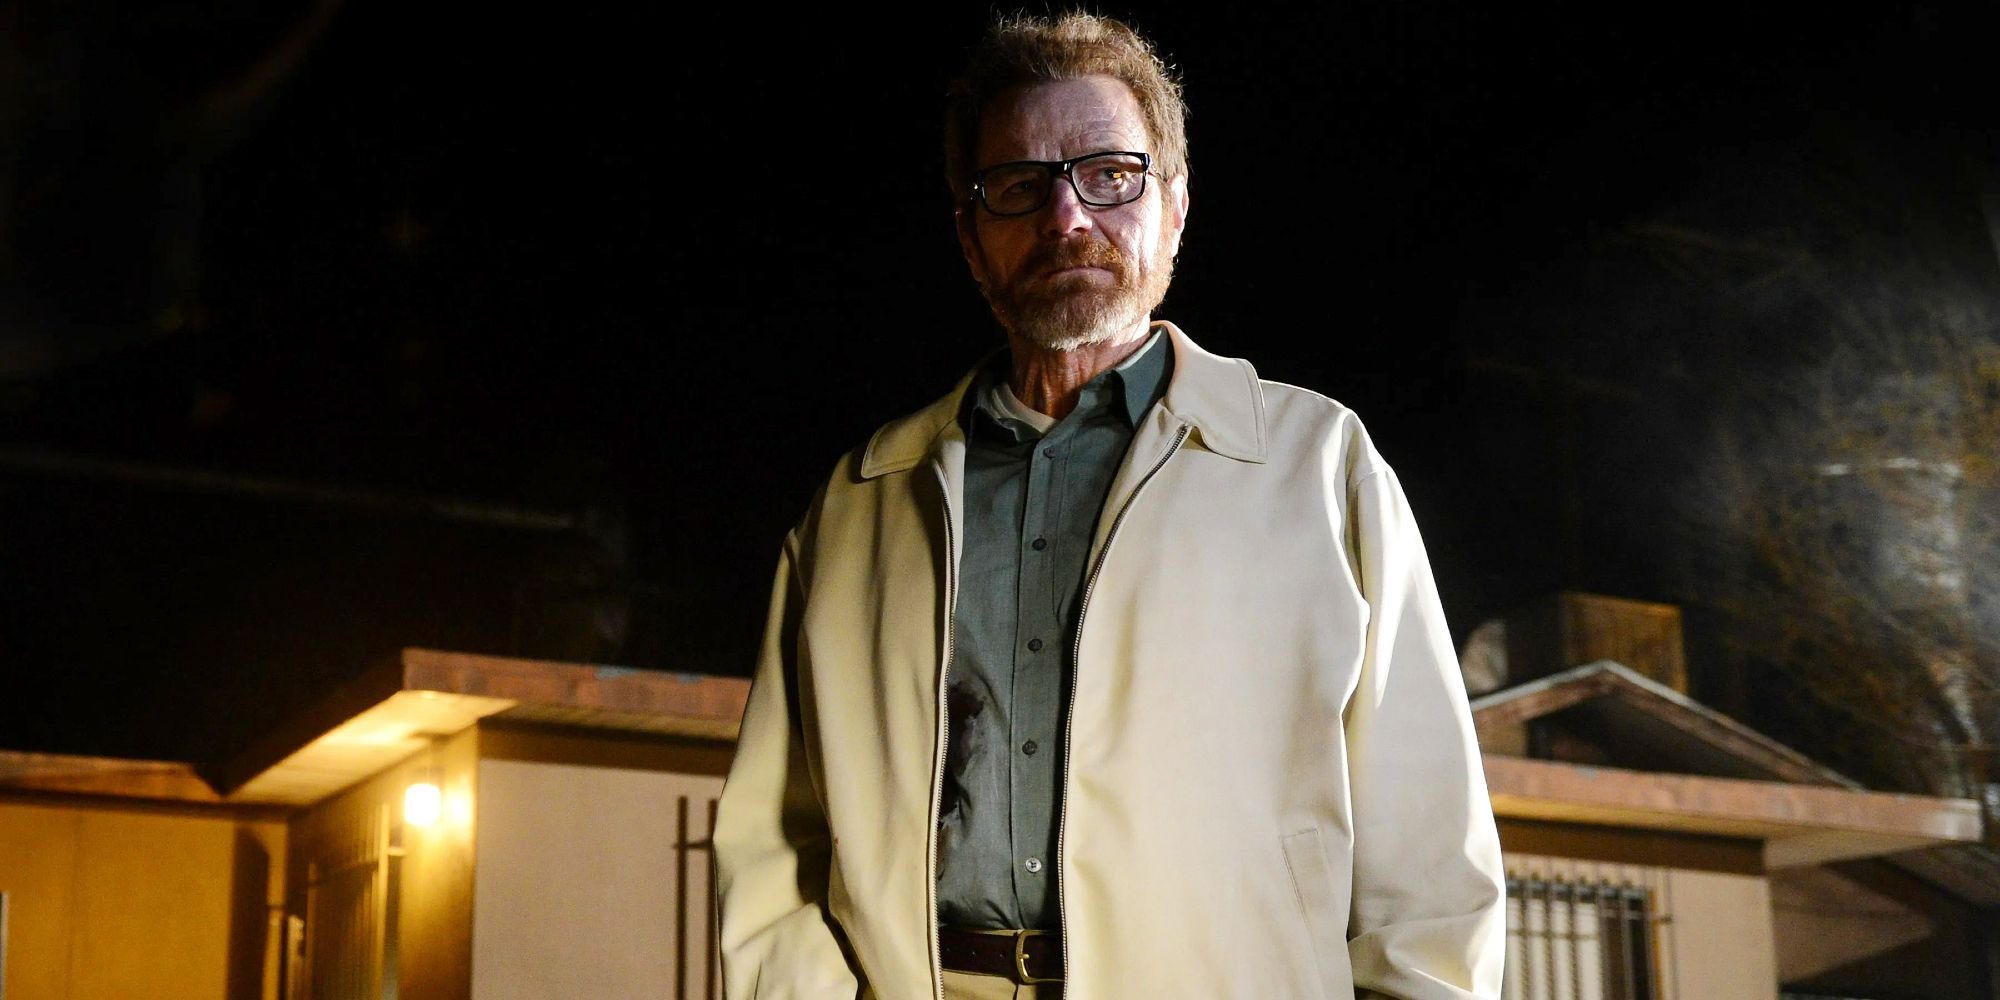 Bryan Cranston as Walter White in the final Breaking Bad season wearing jacket in front of house